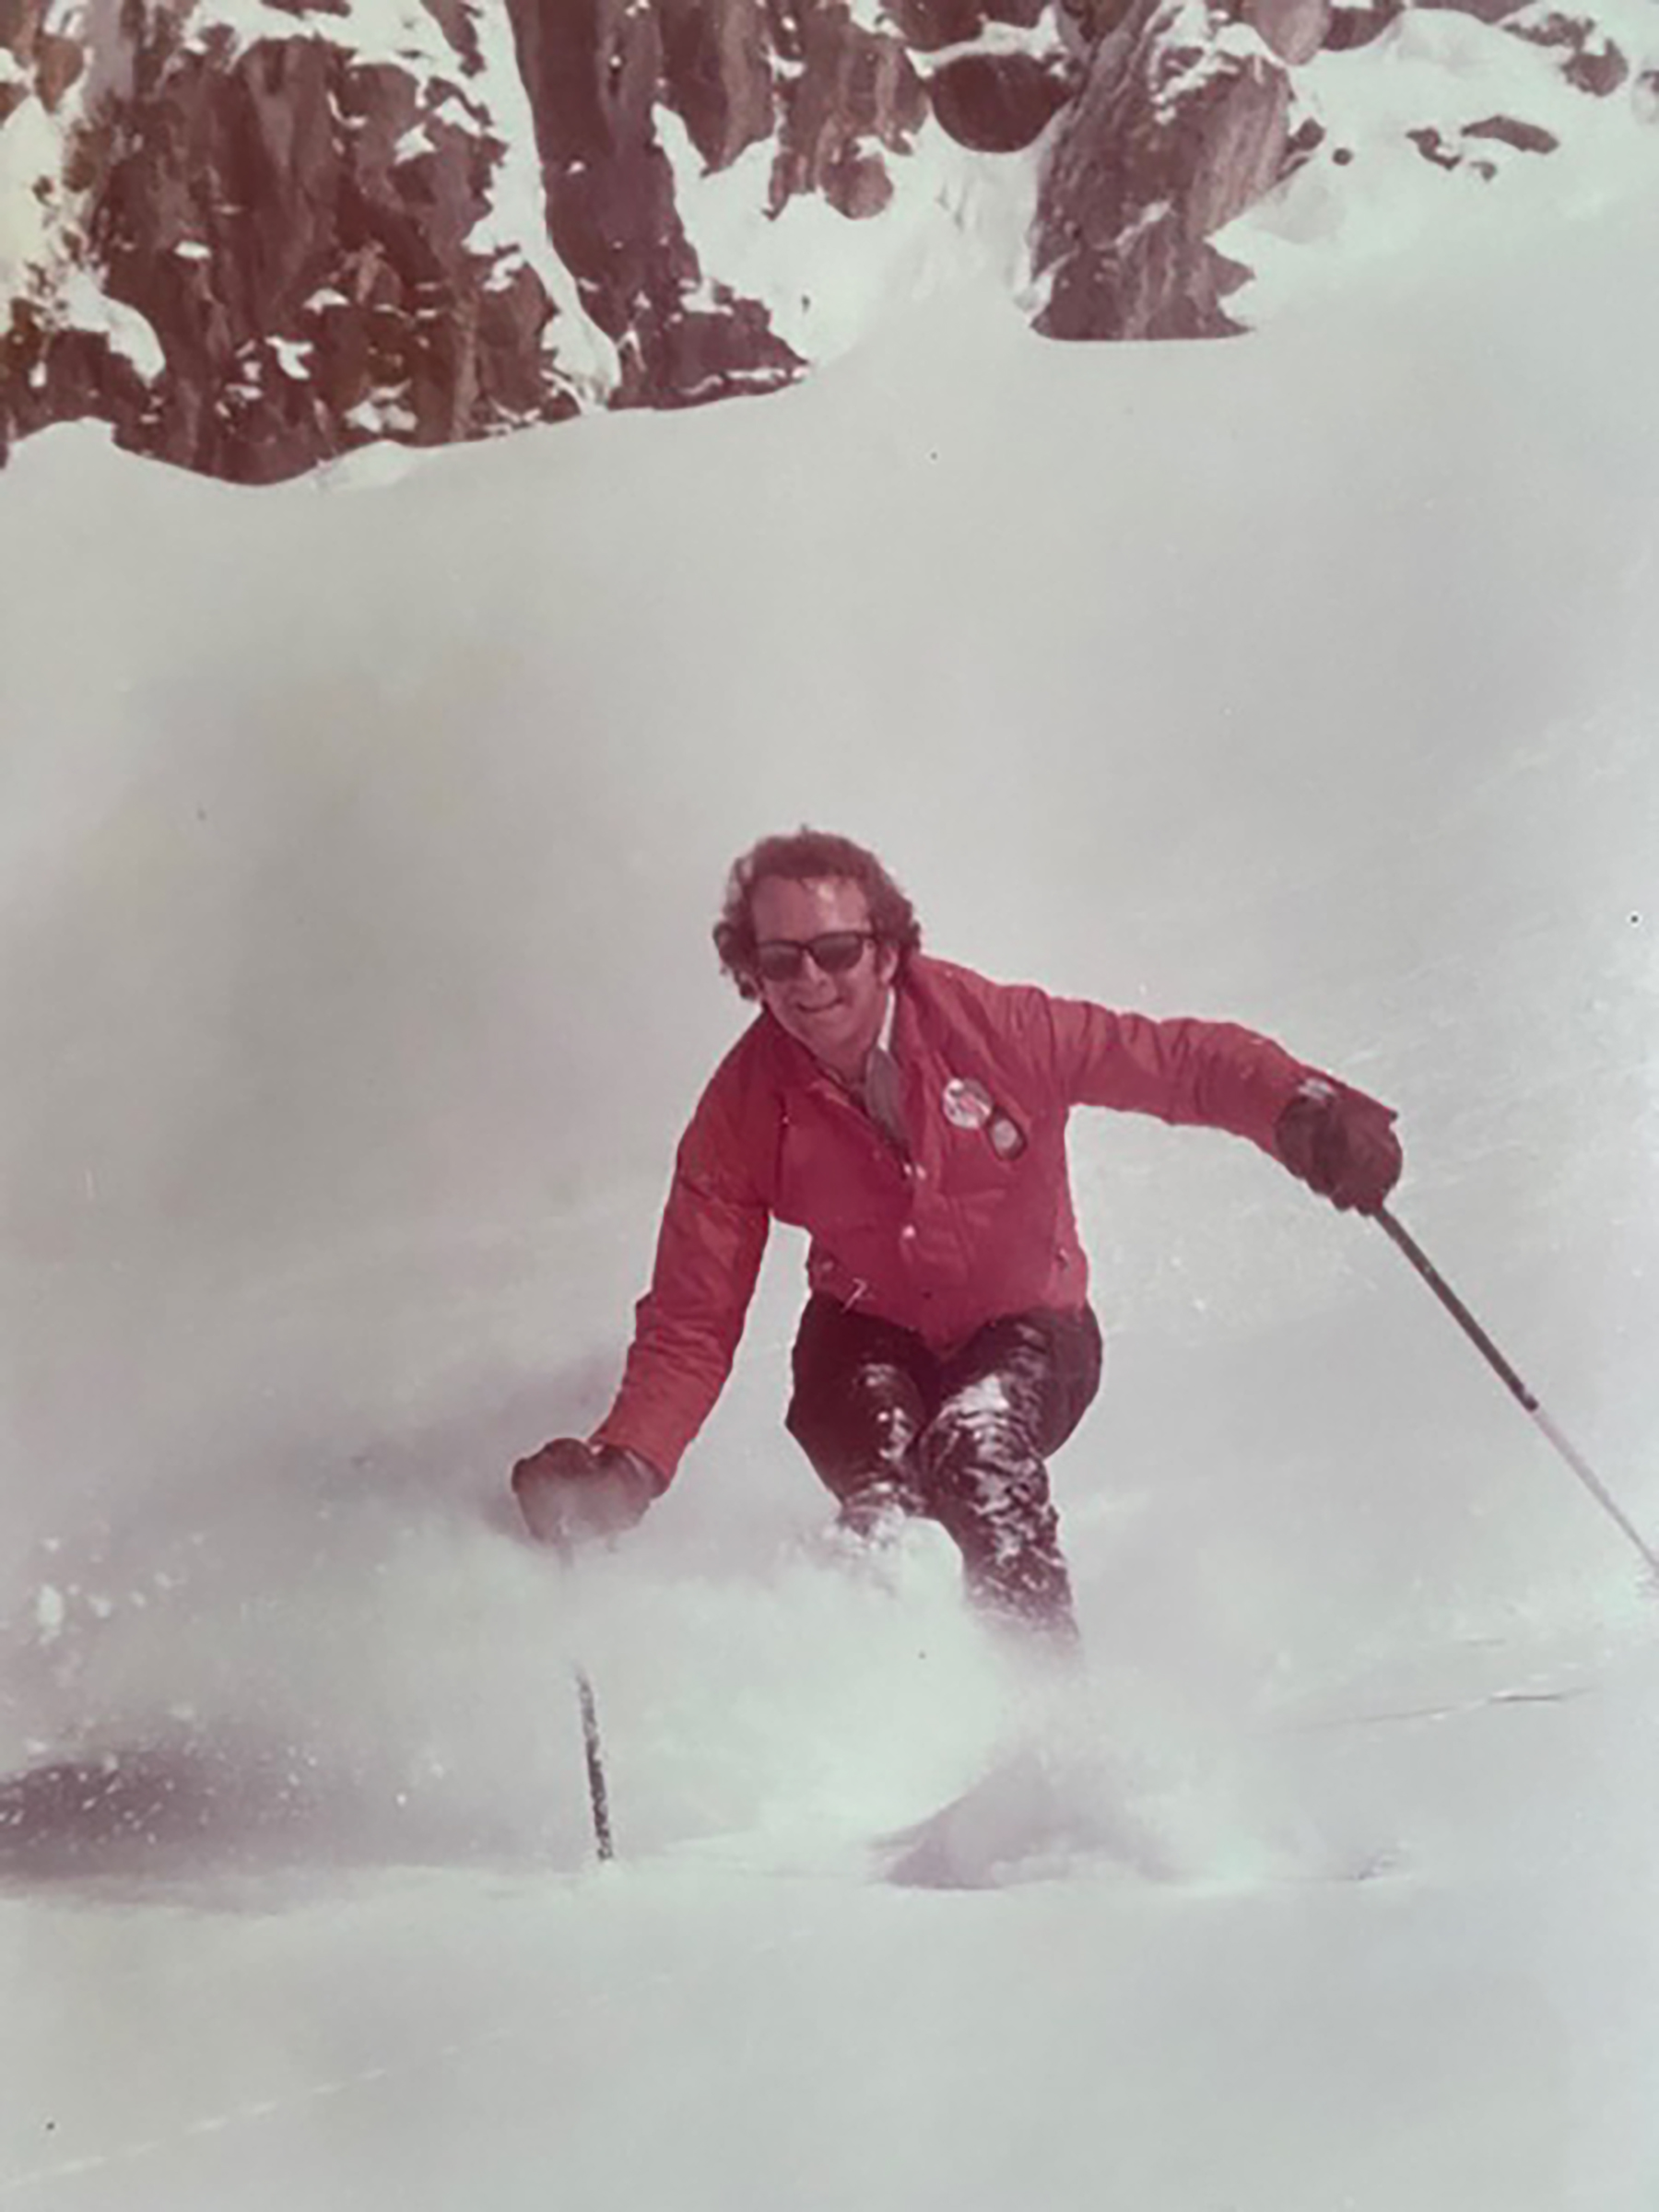 Gow skiing in the 70s